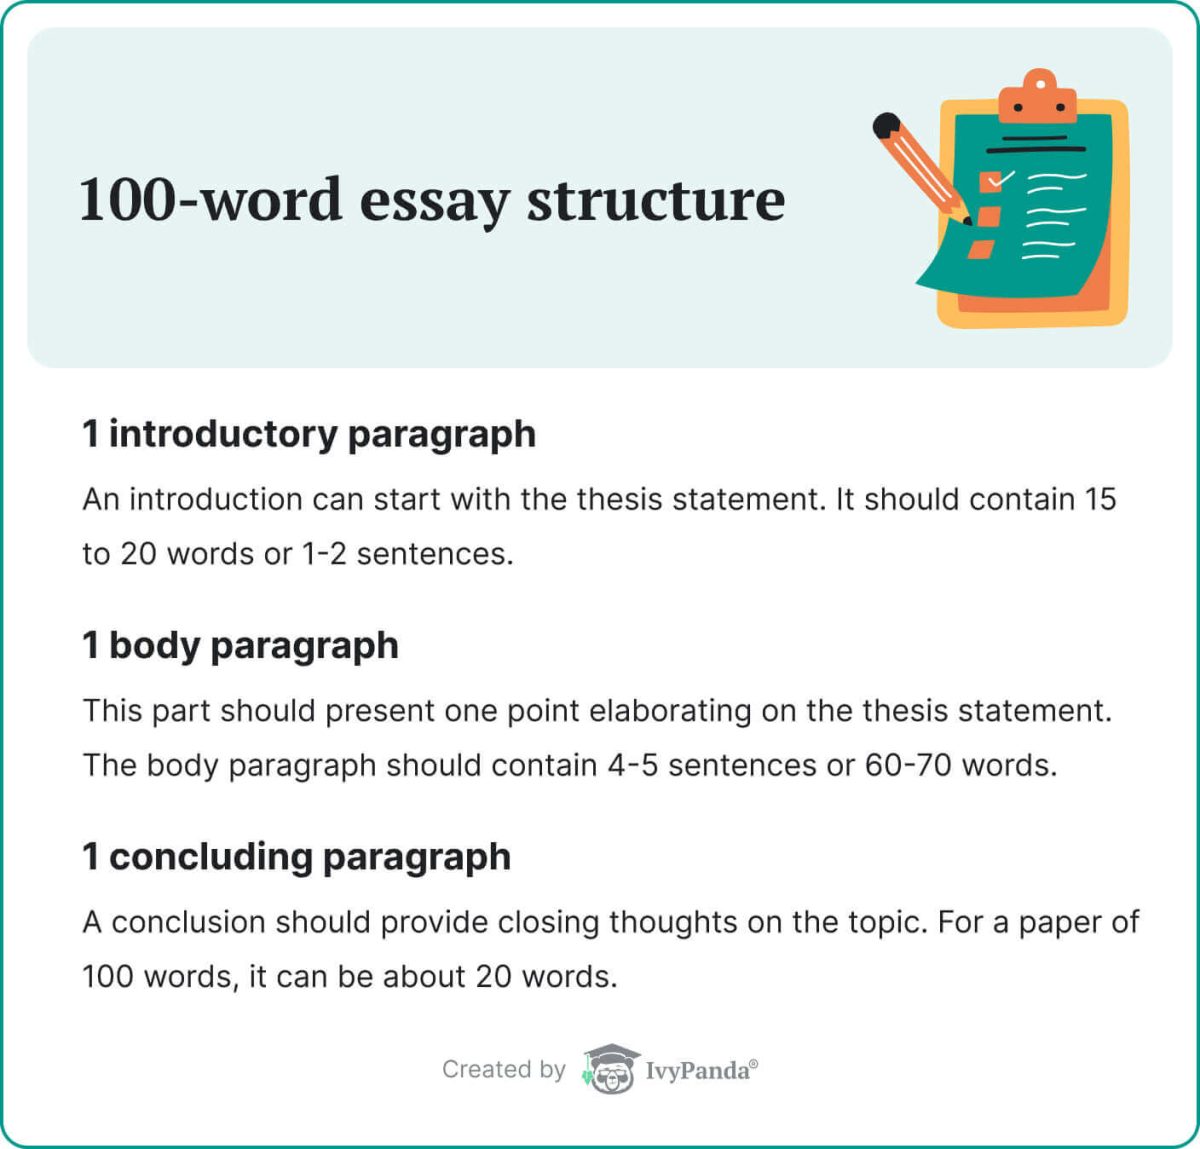 This image shows the 100-word essay structure.